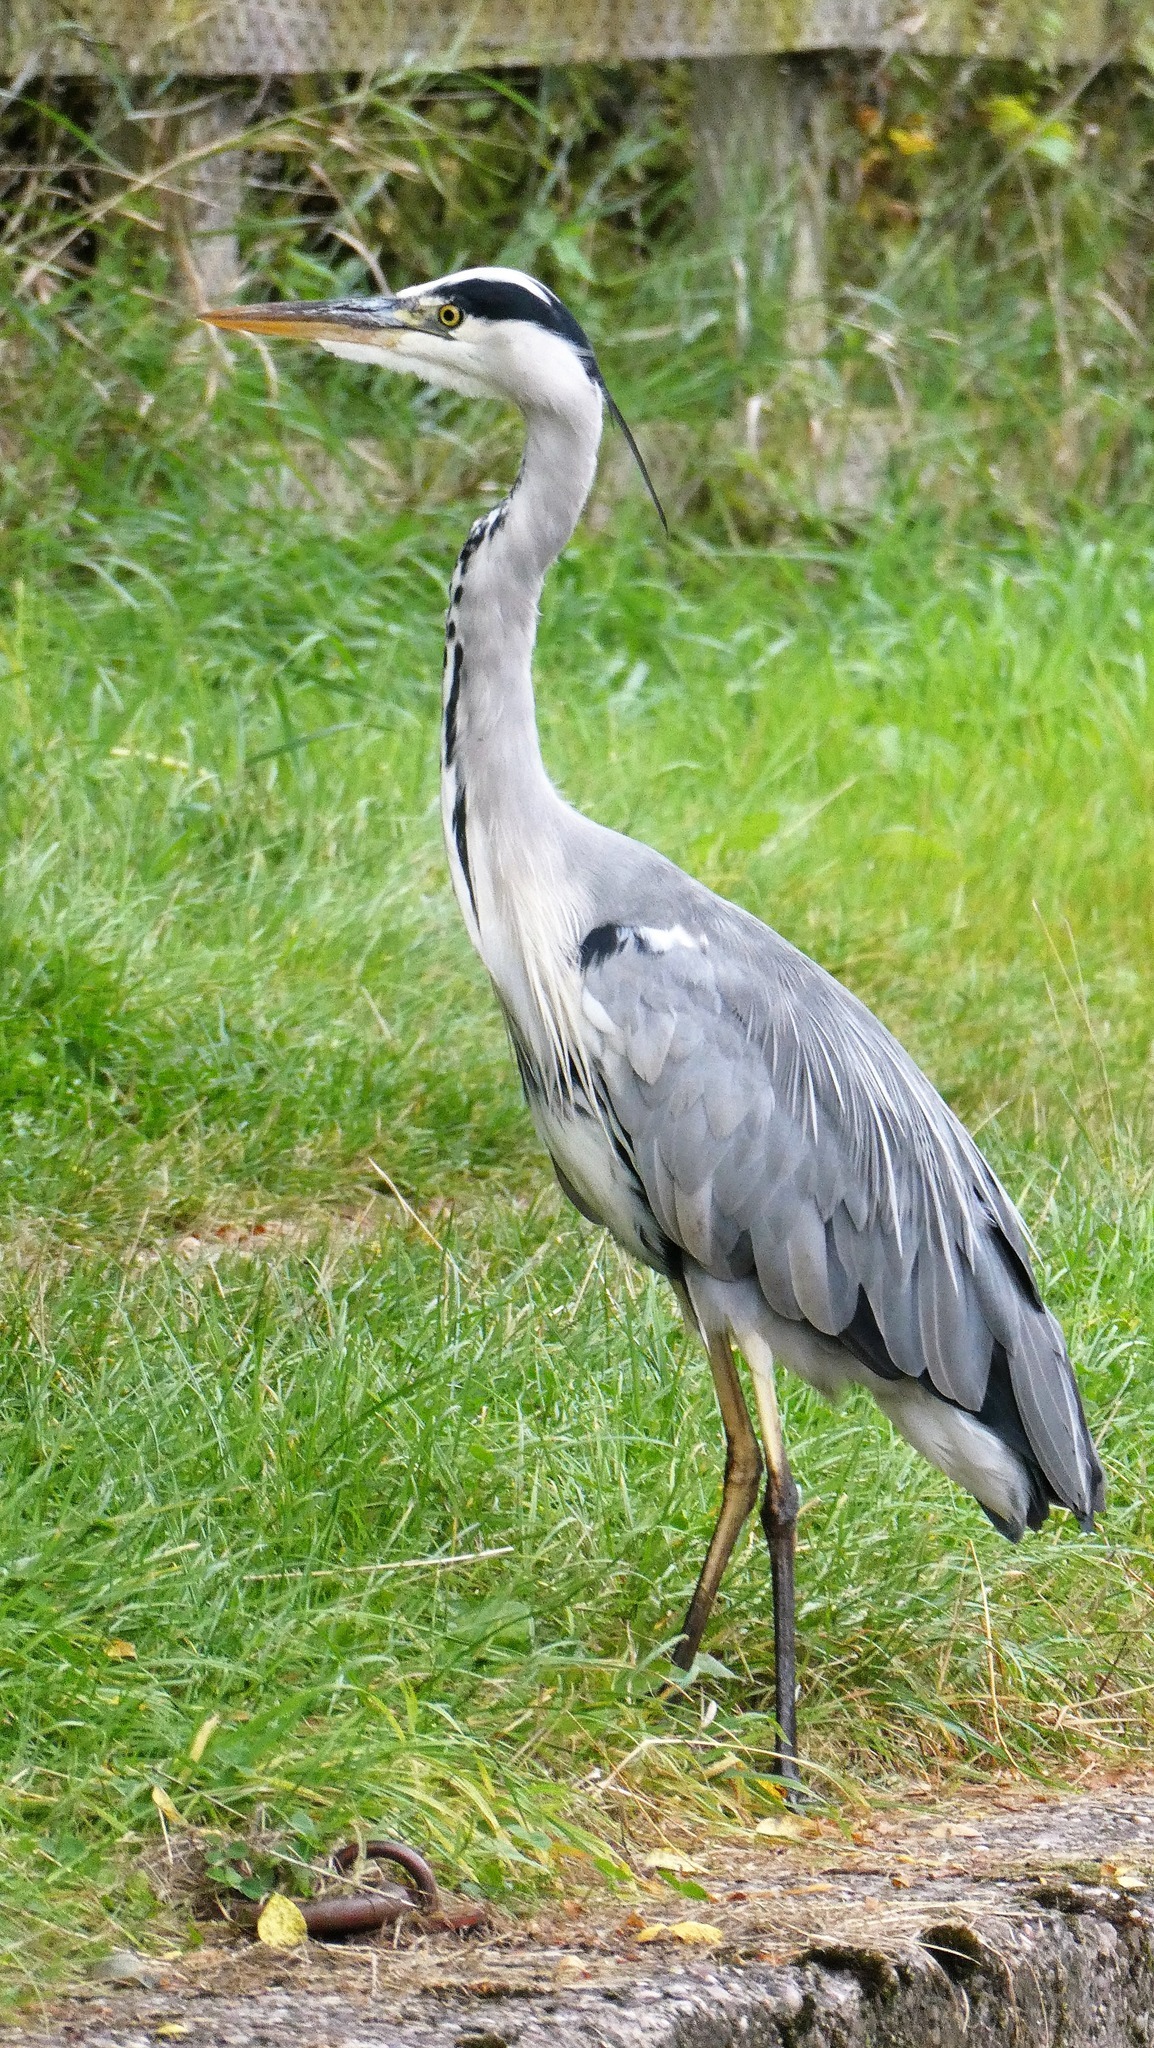 A heron on the Trent and Mersey Canal by Lynne Bentley